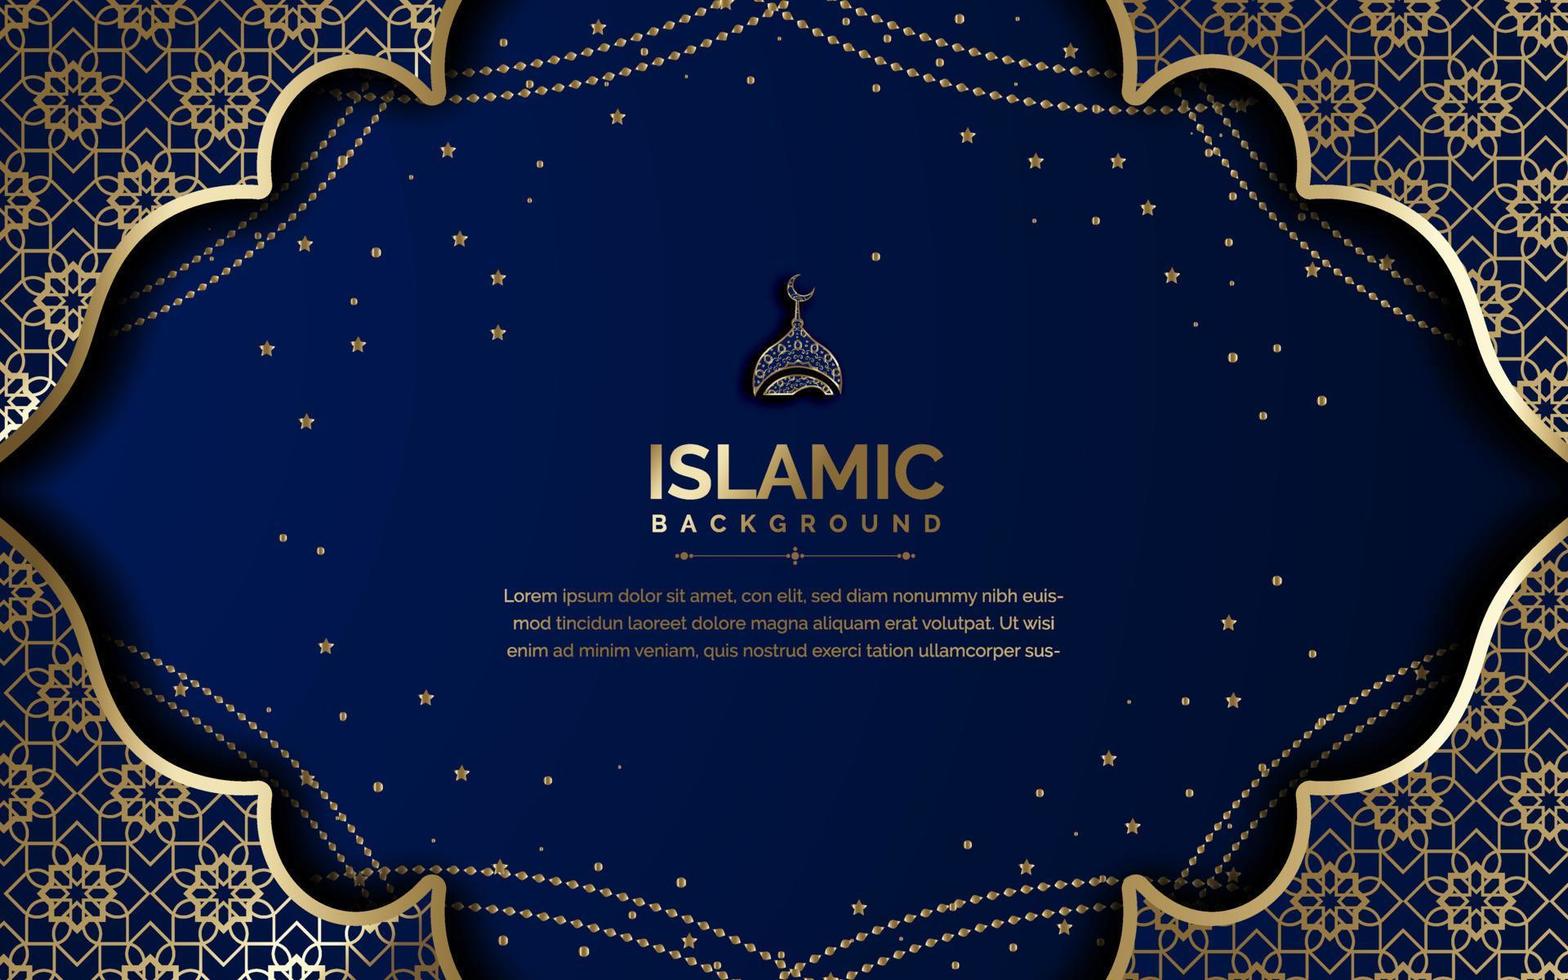 Islamic background and banner design with Arabic calligraphy vector